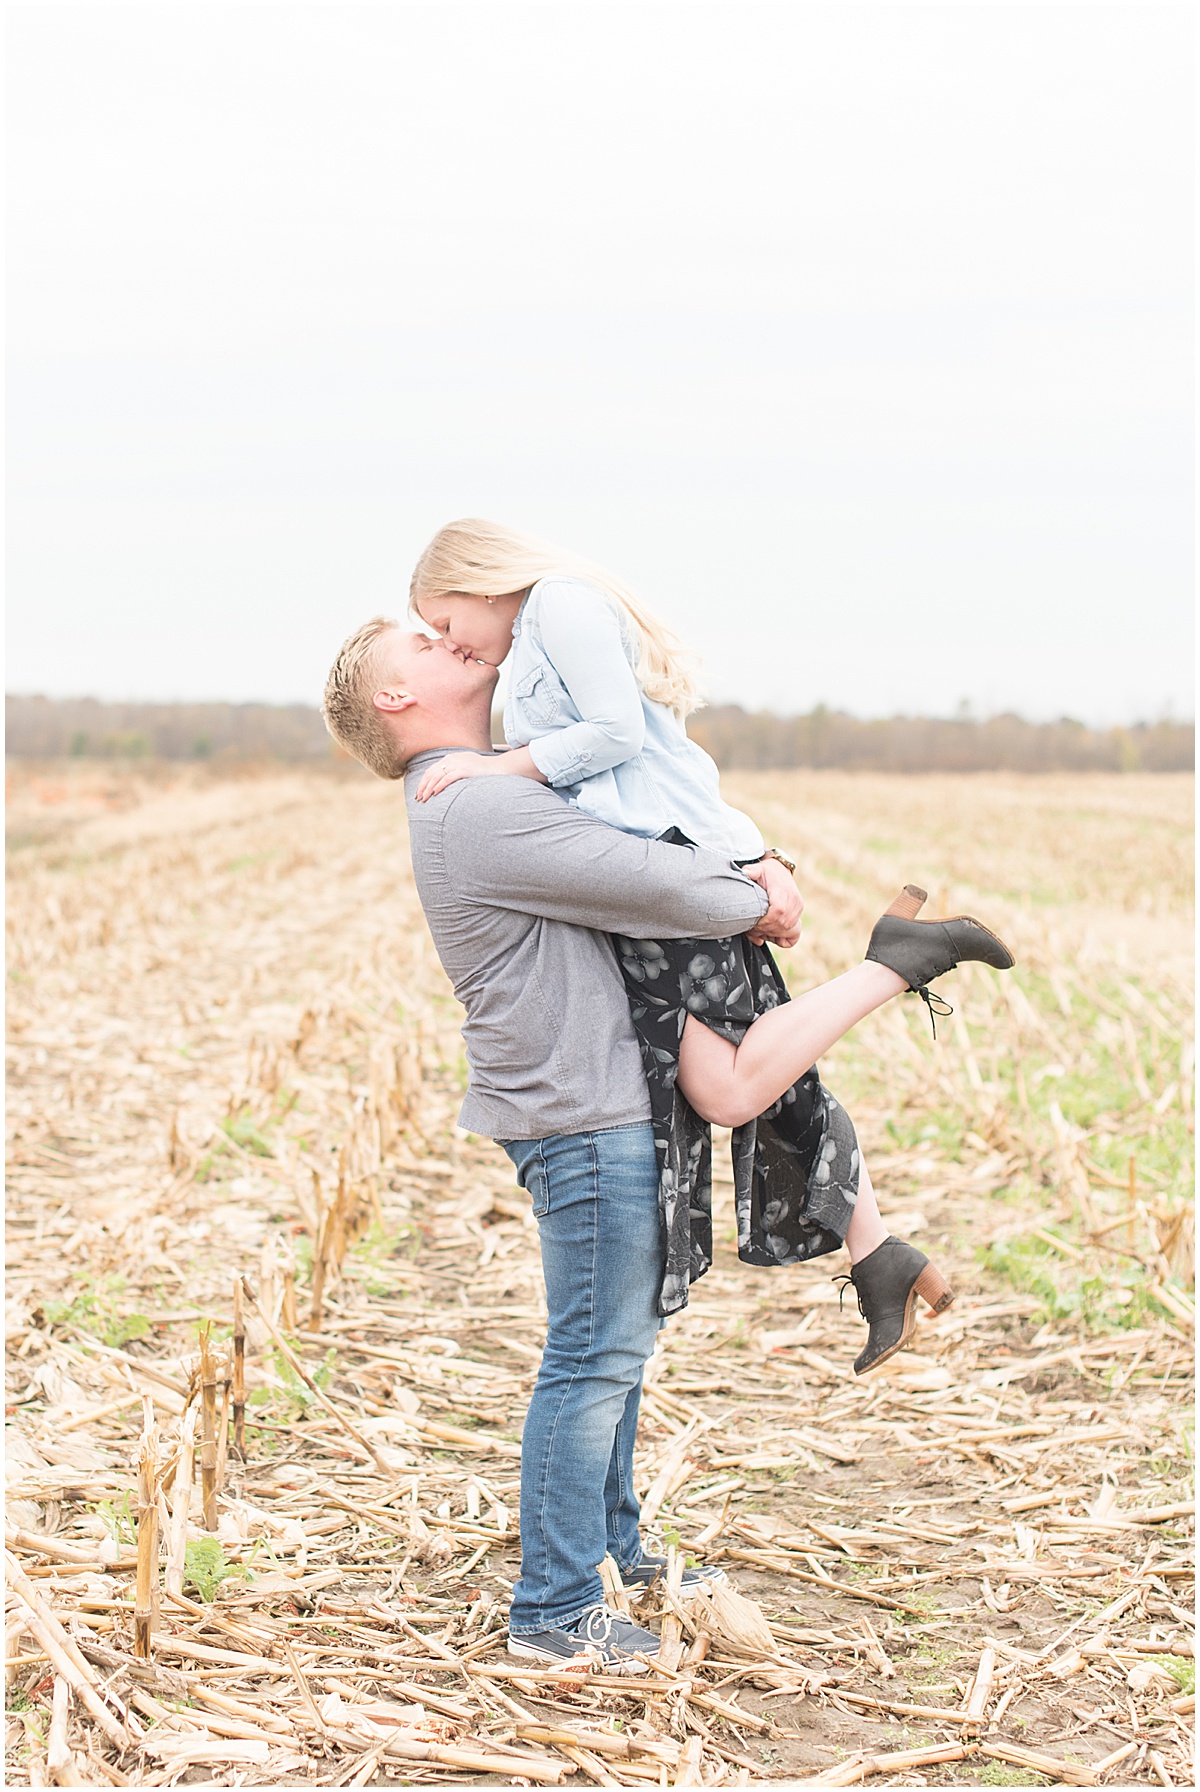 Tyler Van Wanzeele and Baileigh Fleming engagement photos at Wea Creek Orchard in Lafayette Indiana4.jpg